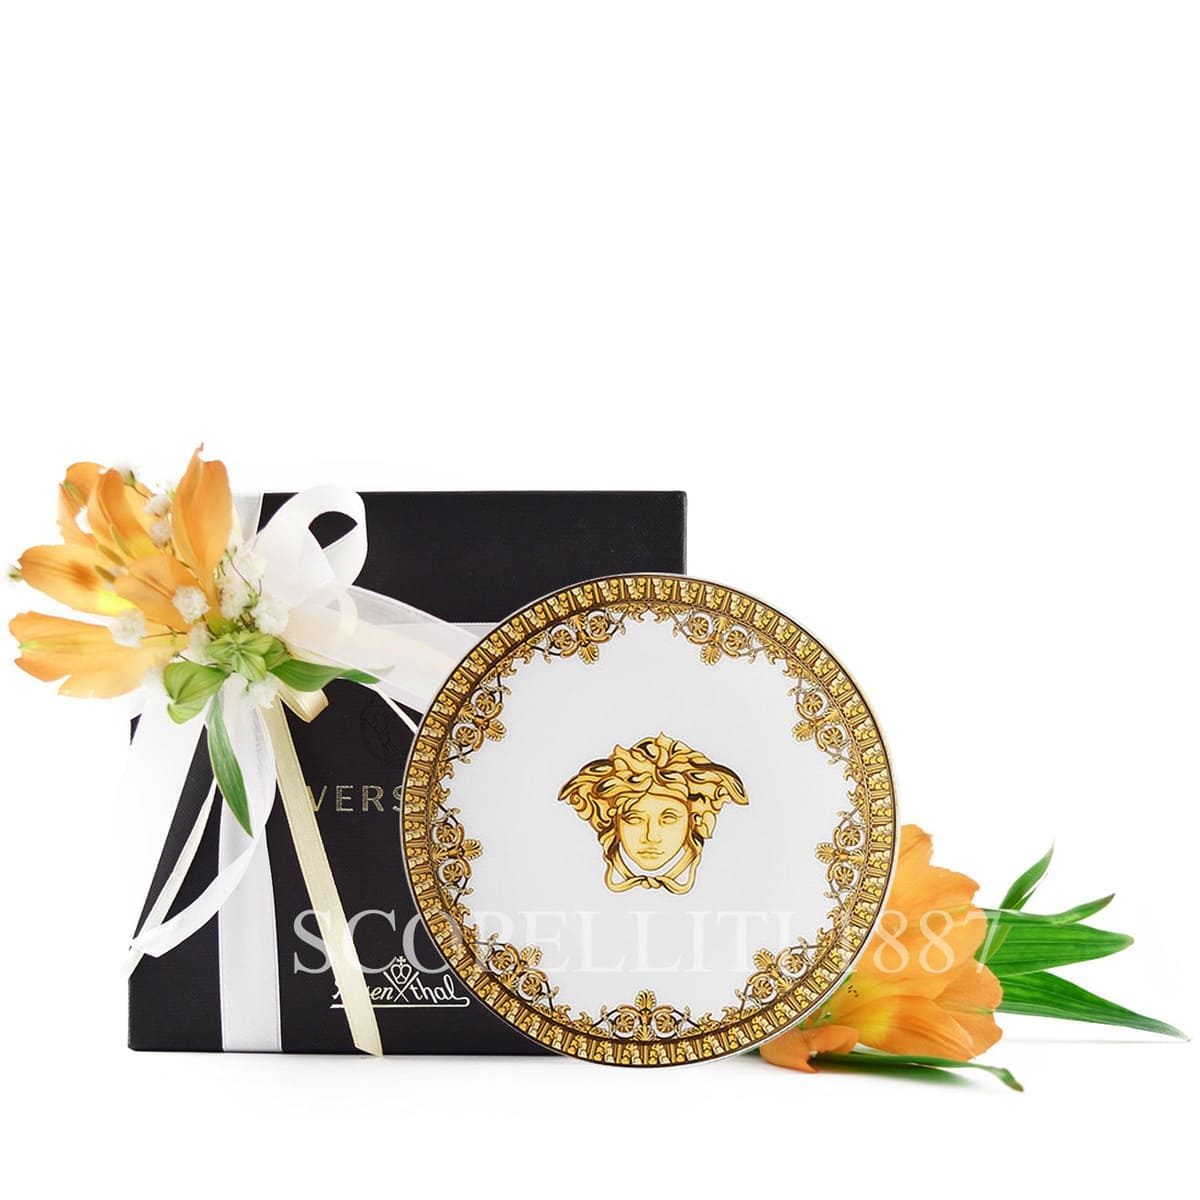 Versace I Love Baroque white small plate 10 cm by Rosenthal